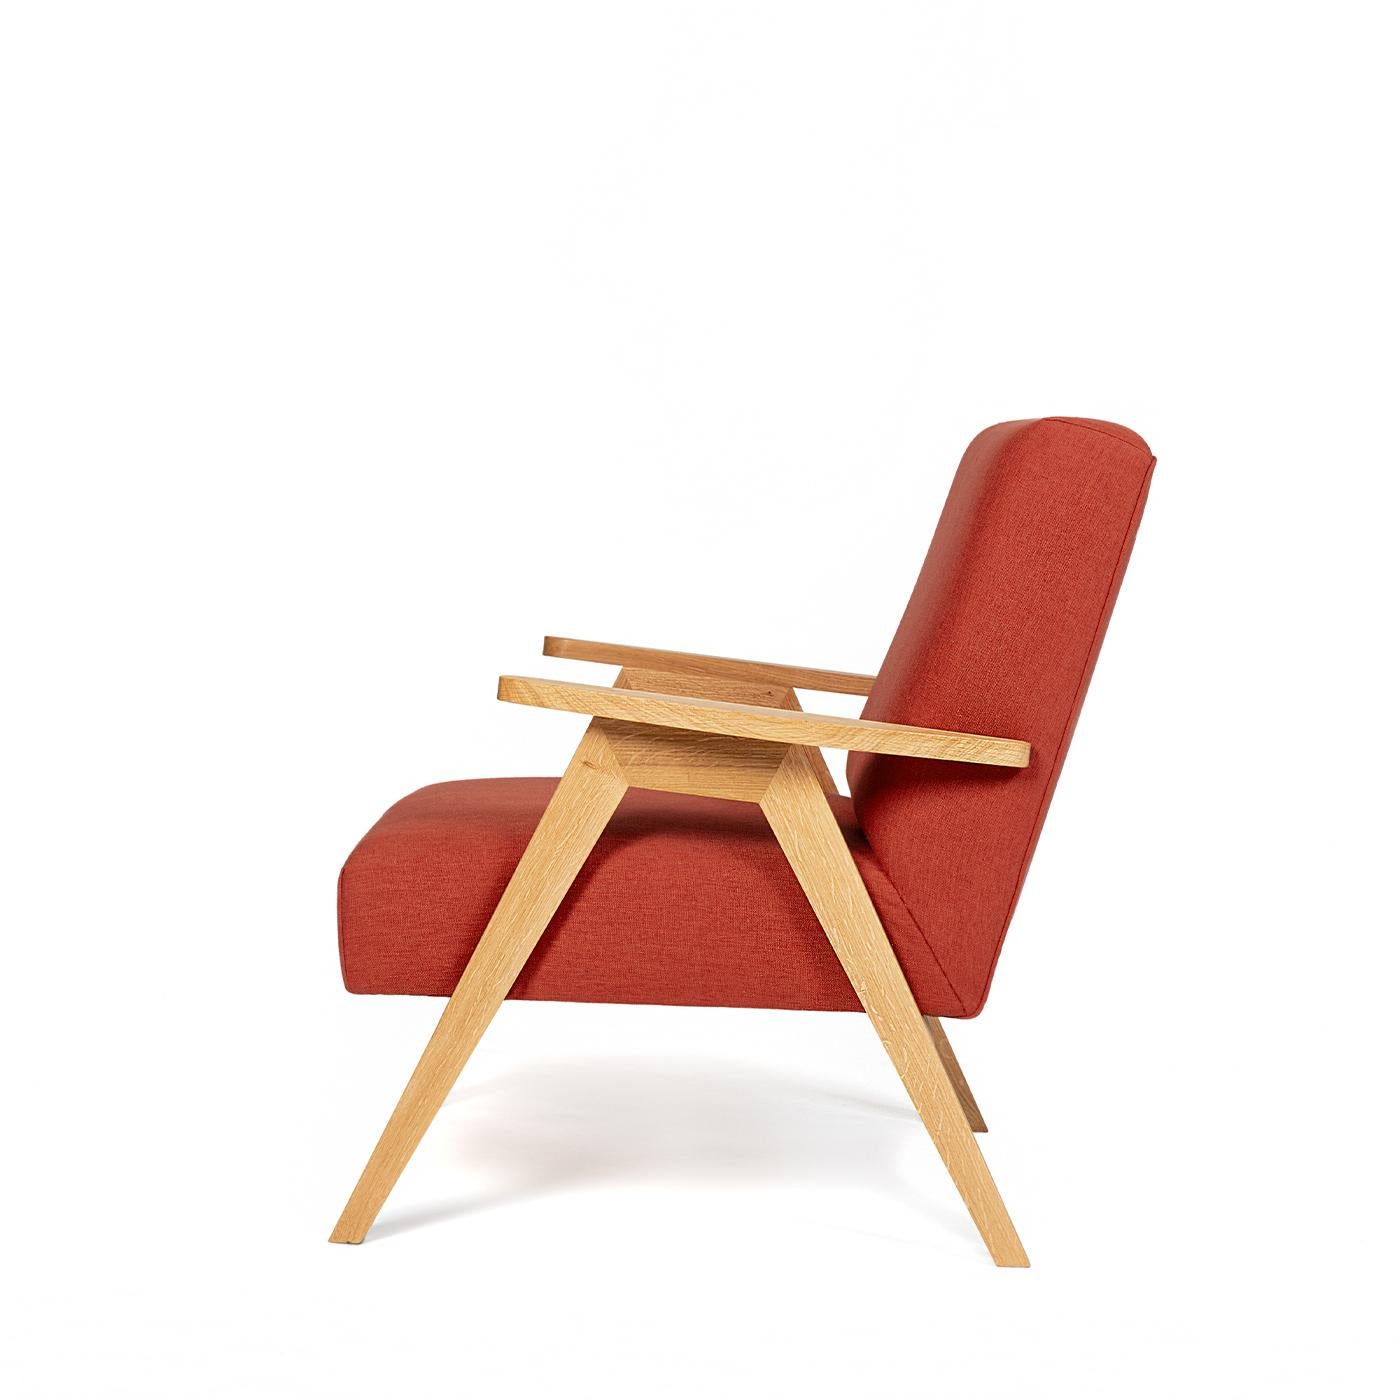 This armchair with clean, modern lines and a pop of color invites you to curl up with a good book. This chair has a solid oak structure and an oil-based varnish finish. The seat and back structure in plywood have foam padding a soft sensation, and